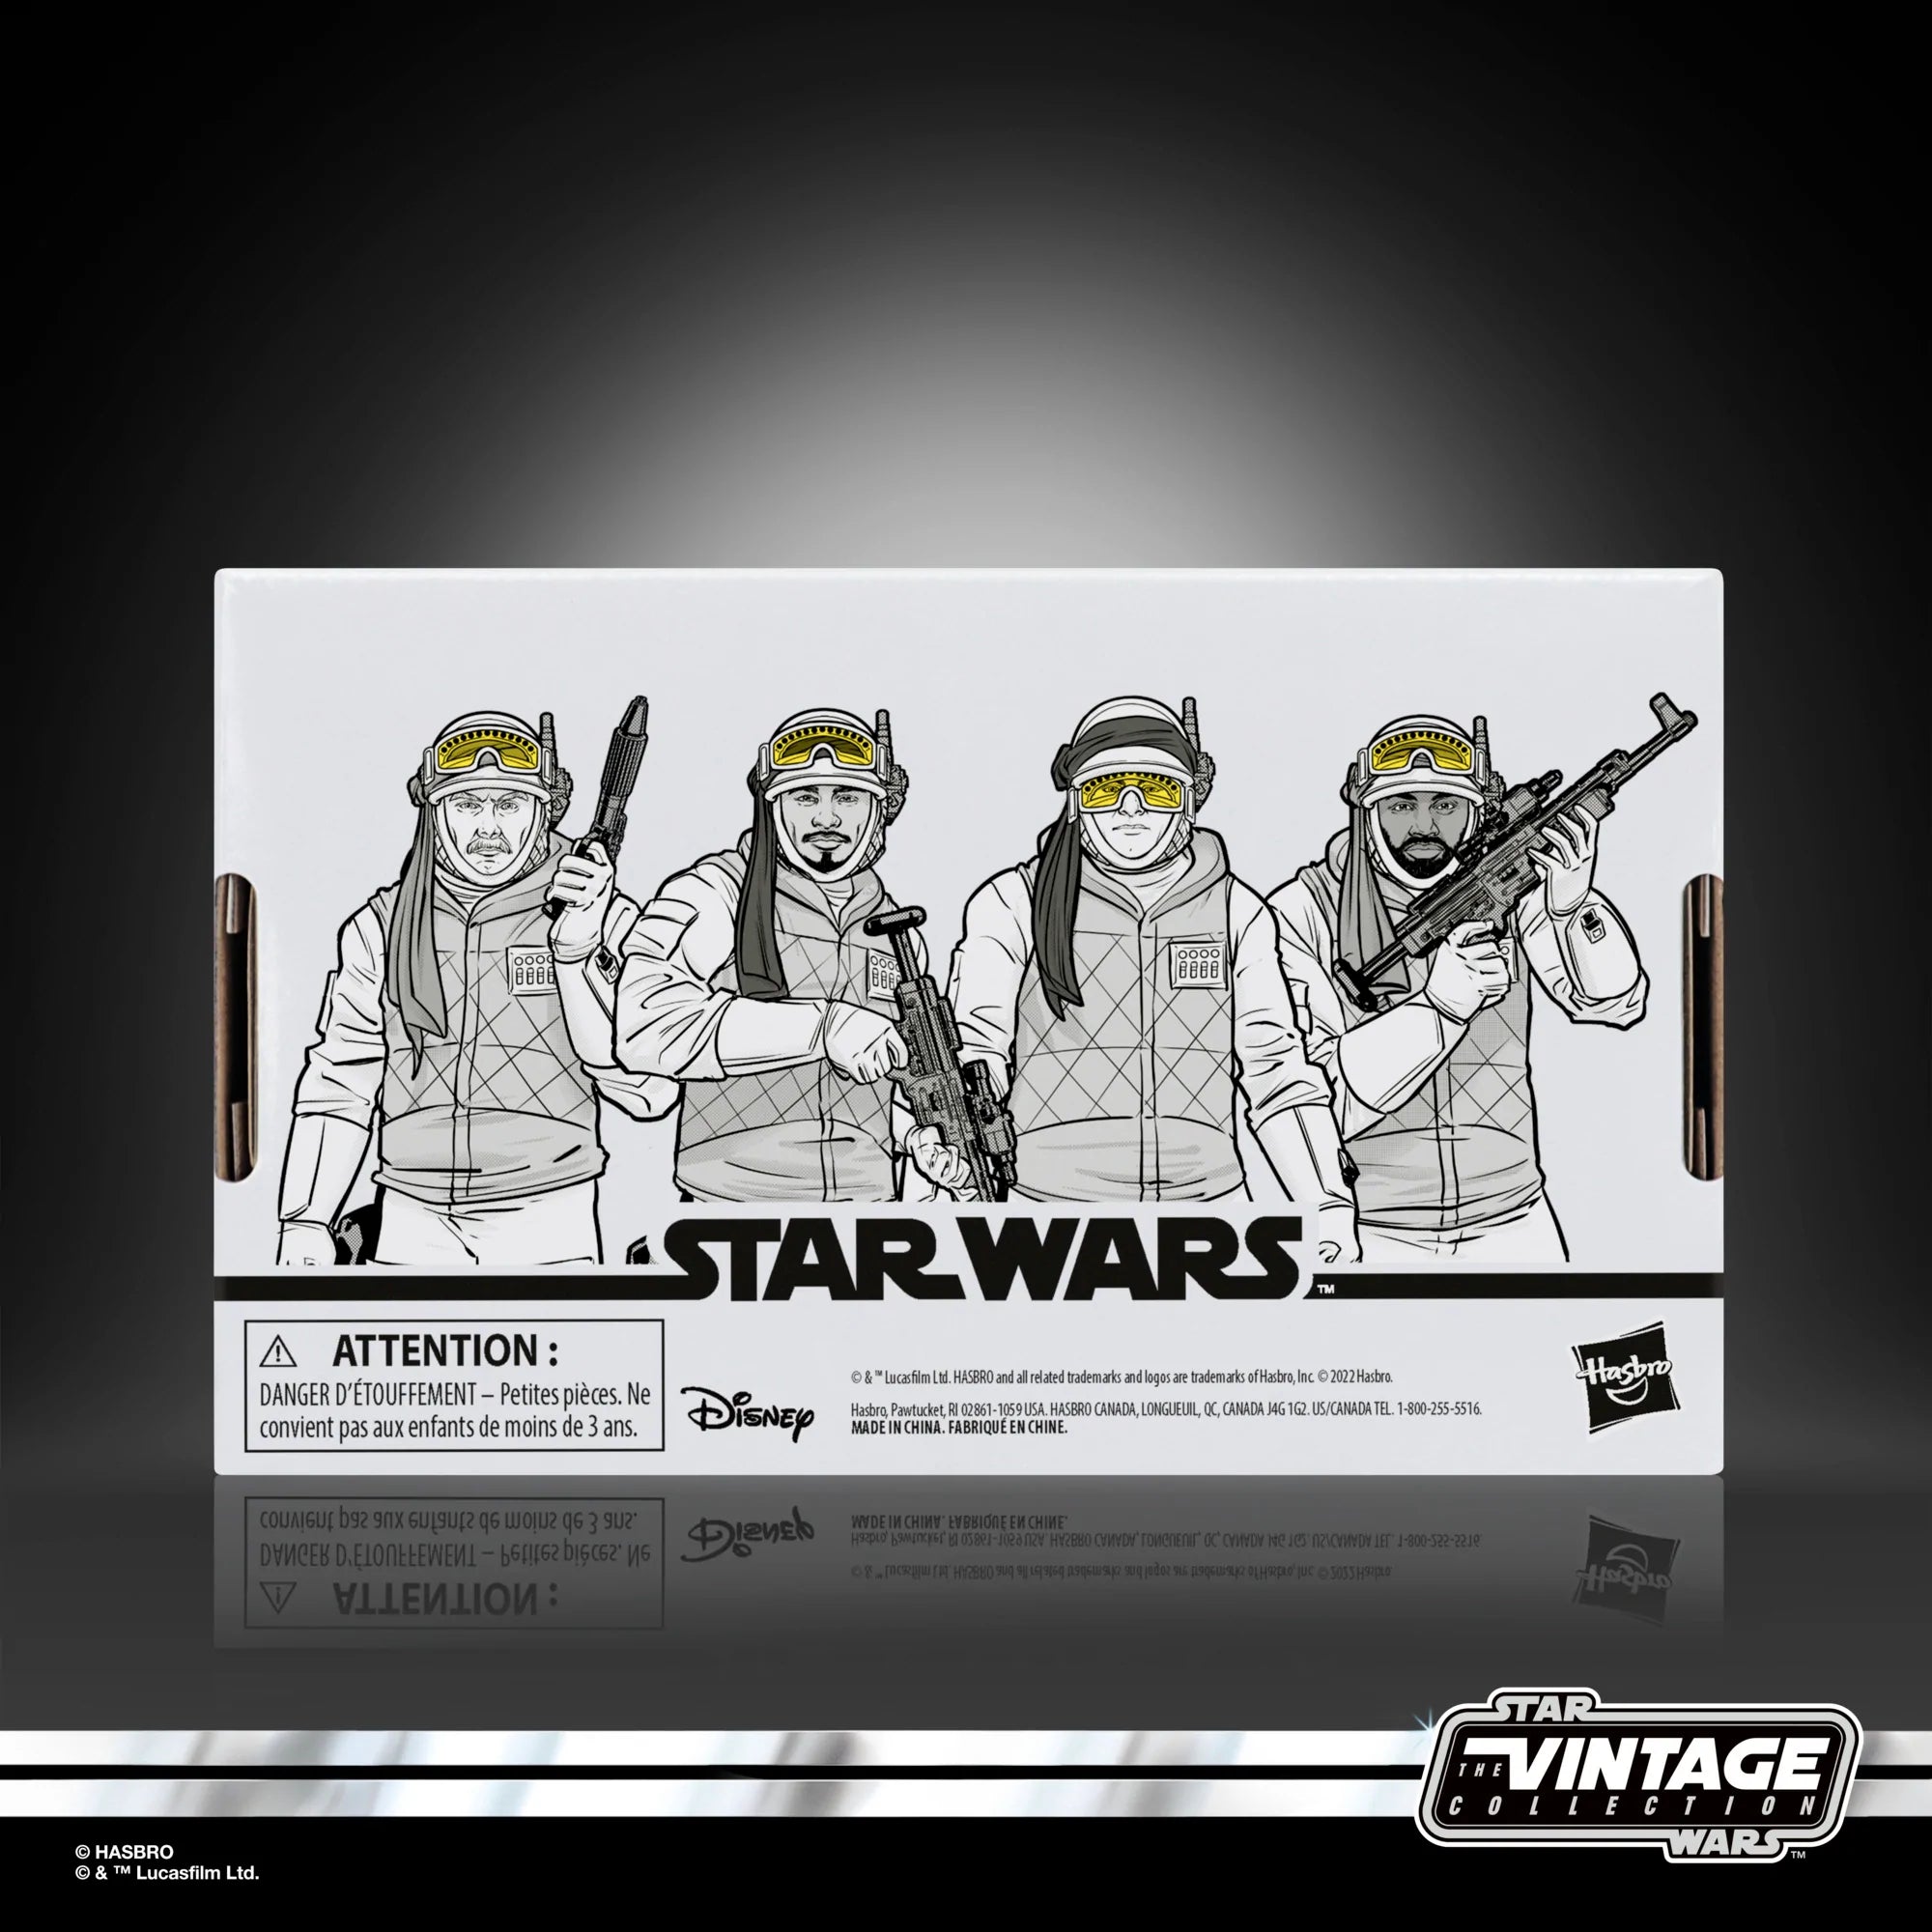 Hasbro - Star Wars The Vintage Collection - Rebel Soldier (Echo Base Battle Gear) 4-Pack